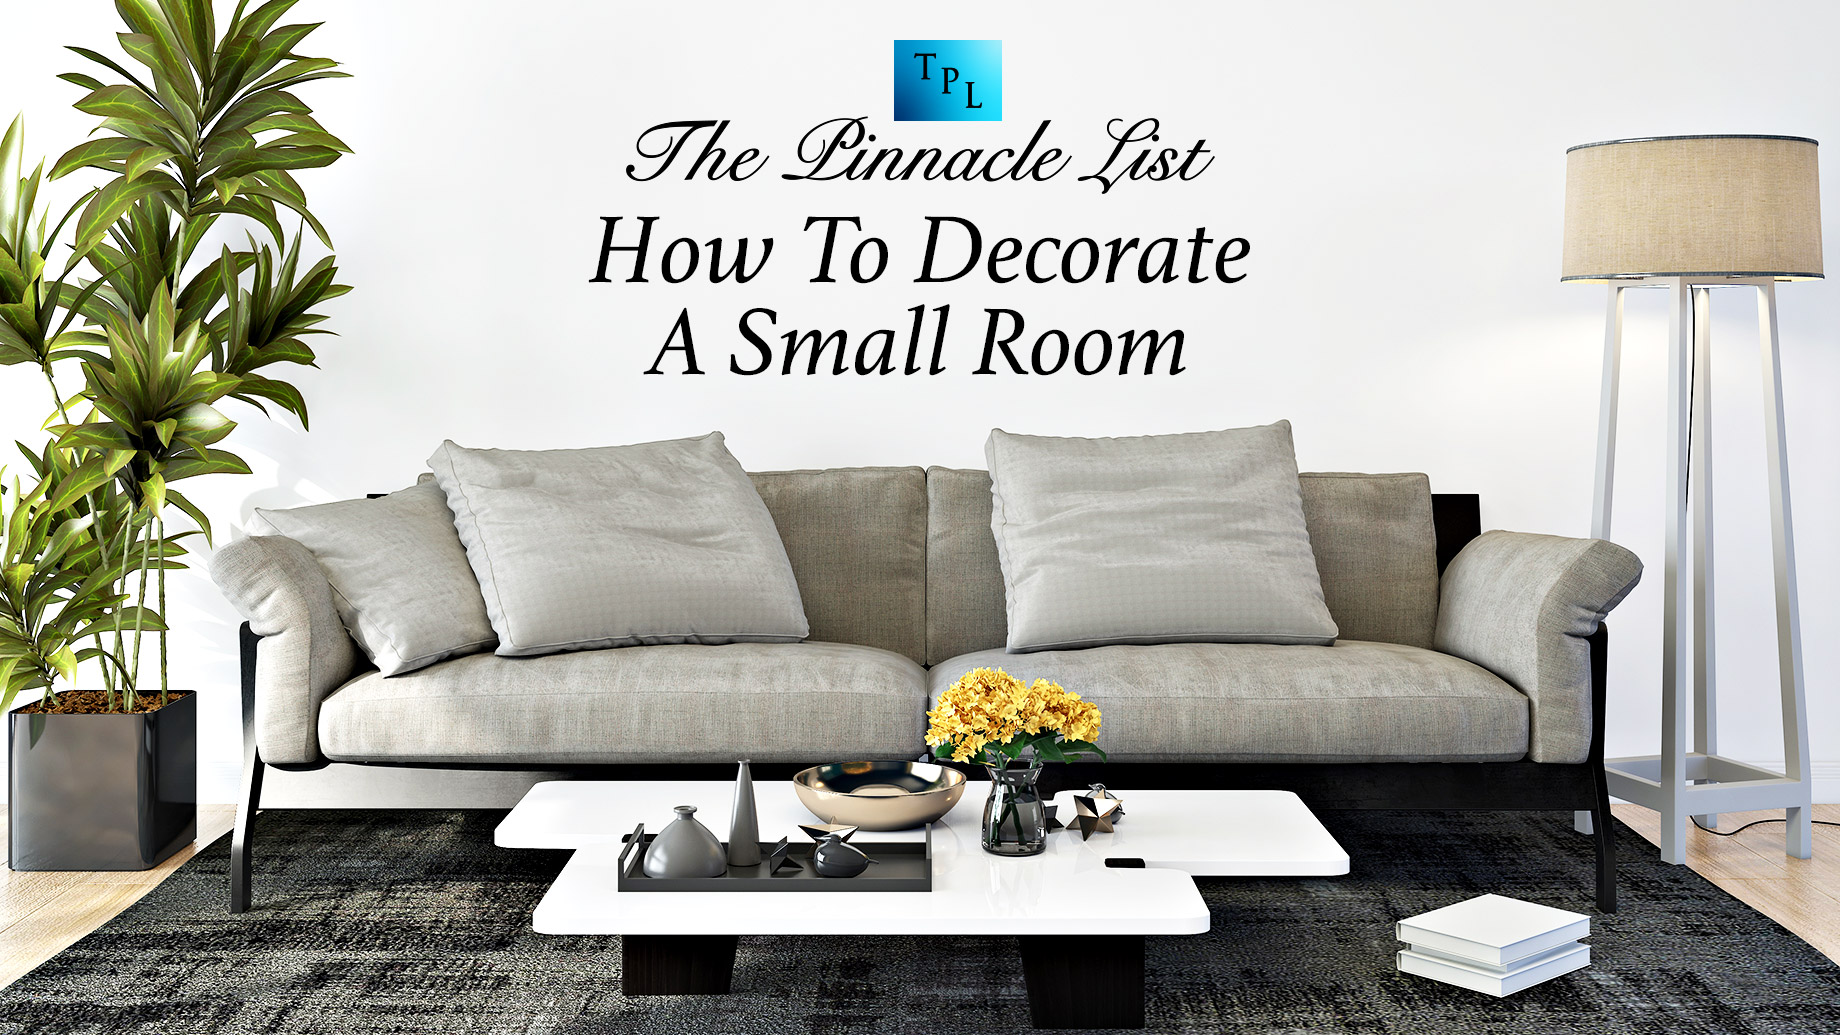 How To Decorate A Small Room